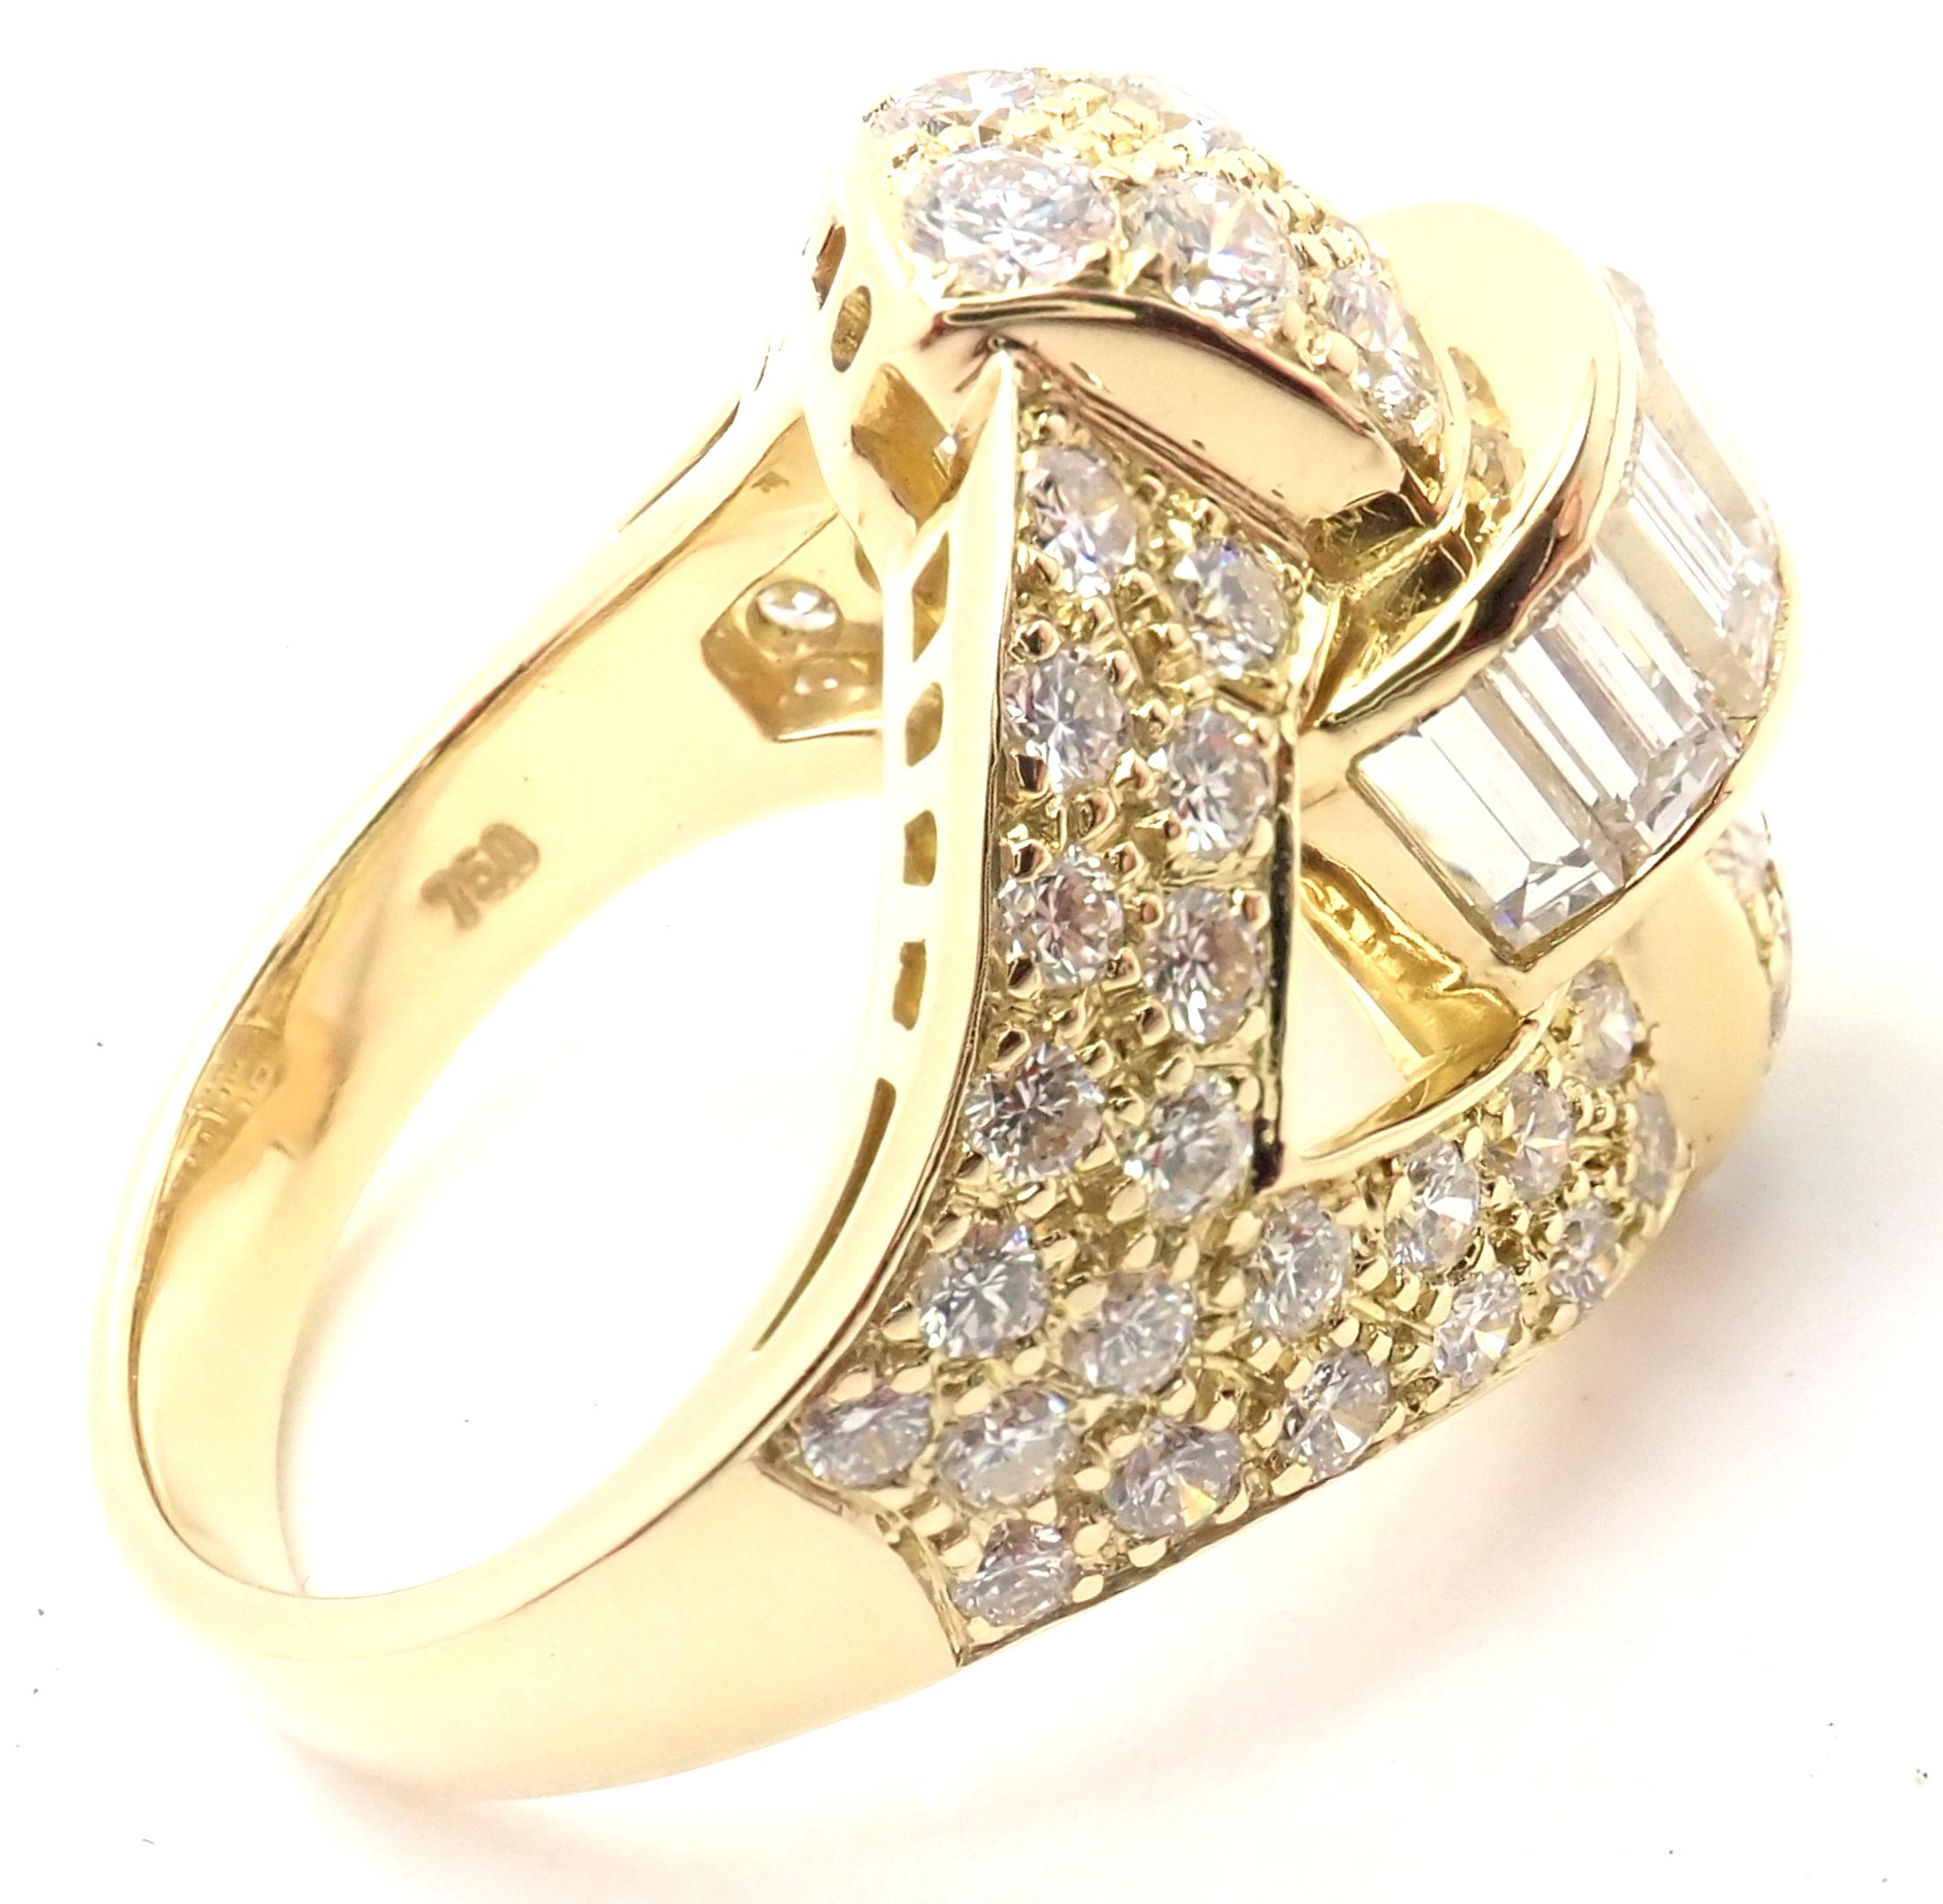 18k Yellow Gold Diamond Cocktail Ring by Piaget. 
With 56 brilliant round & marque cut diamonds VS1 clarity, G color and 7 emerald cut diamonds total weight approximately 3ct
Details: 
Size: 5.5
Width: 19mm
Weight: 9.7 grams
Stamped Hallmarks: